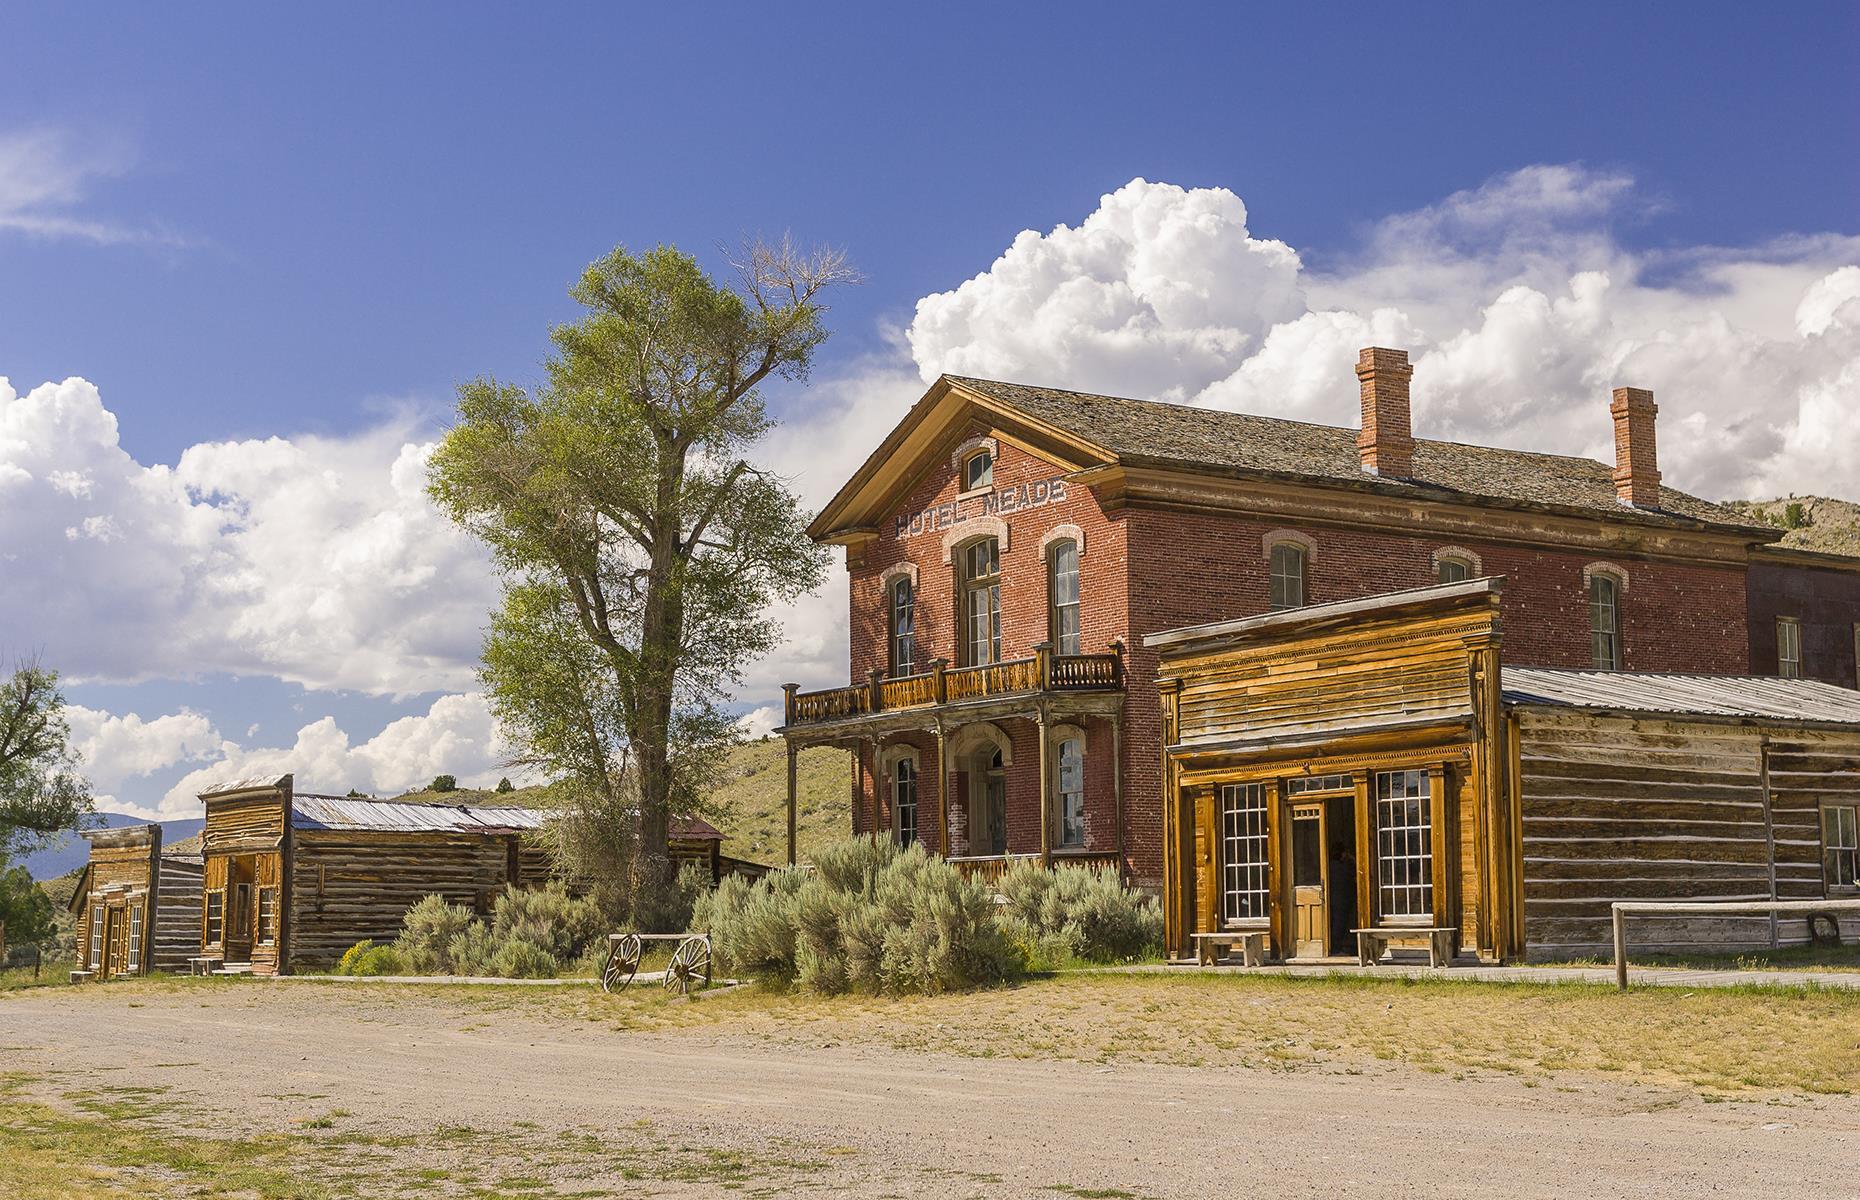 <p>There's something inherently eerie about a once-bustling place that's been long abandoned and <a href="http://bannack.org/">Bannack</a>, in southwestern Montana, is among America's most haunting ghost towns. The shell of a 19th-century church, a hotel and a Masonic lodge – once catering to hundreds of gold miners – are scattered about the dusty plains here and they're apparently host to a spirit or two. Ghost tours are held here during the spooky season and visitors might even spot the phantom of a young girl who's said to swirl around the old courthouse.</p>